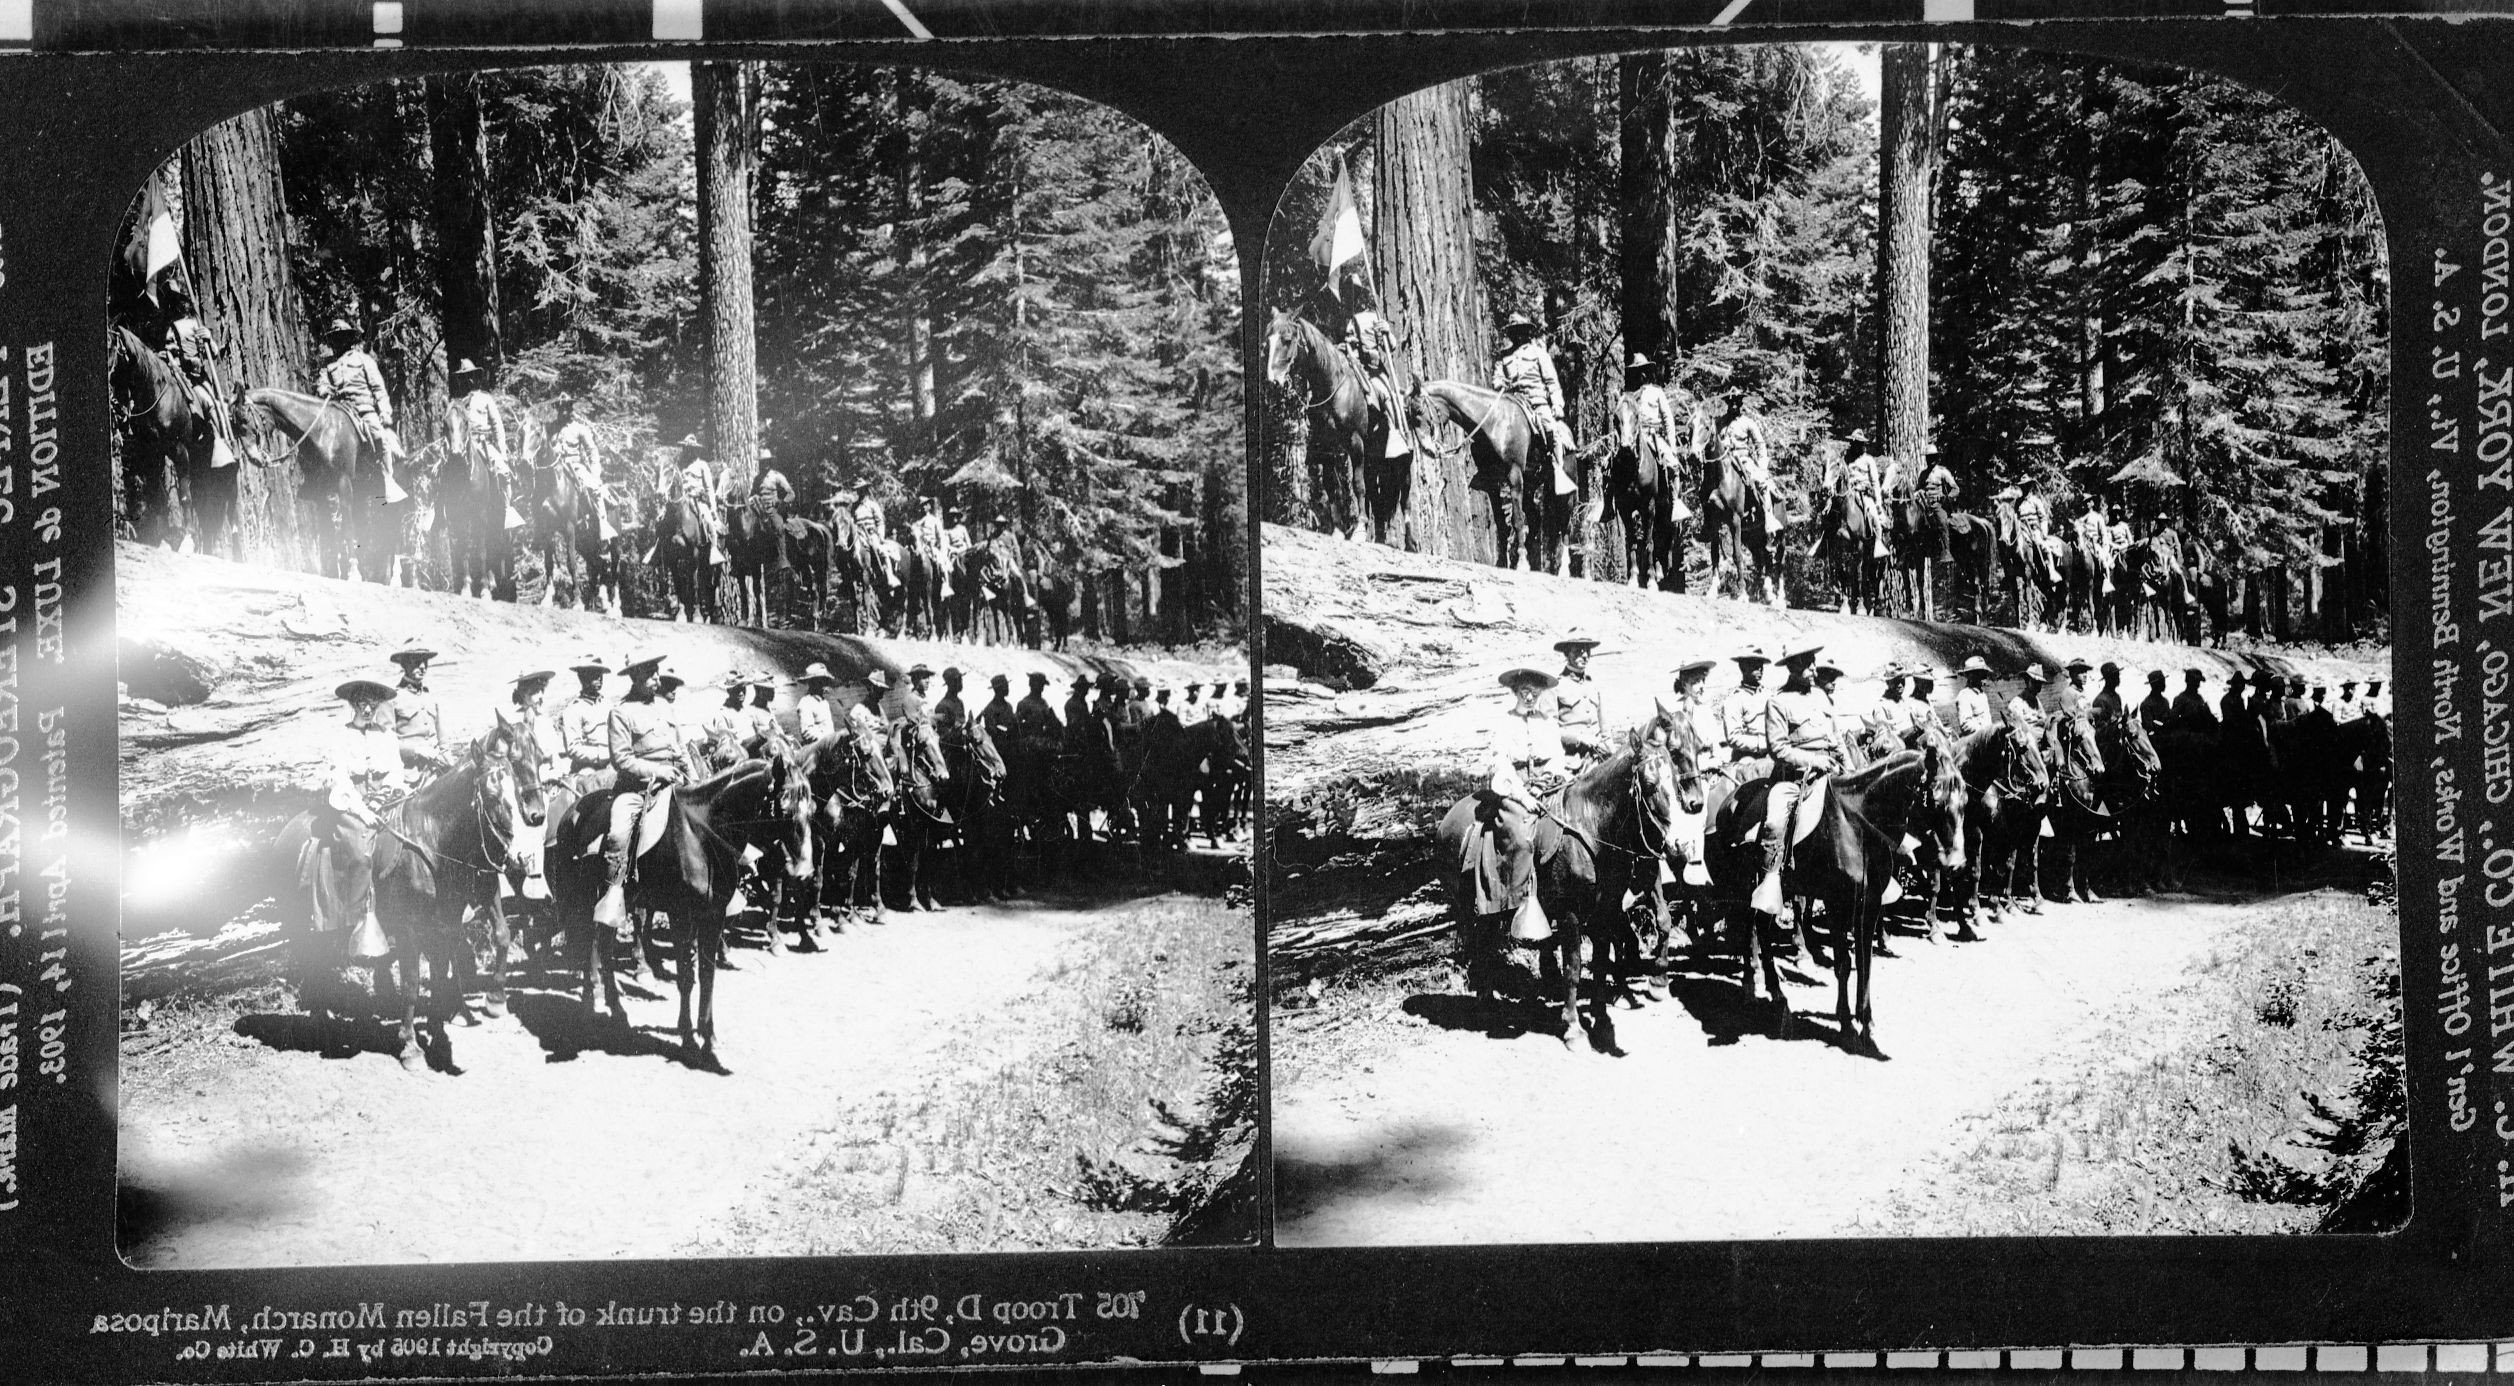 Copy Neg: Leroy Radanovich, February 2002. Stereoview. #705 "Troop D, 9th Cav., on the trunk of the Fallen Monarch, Mariposa Grove, Cal., USA" Copied courtesy of Dean Shenk. See also RL-19,829 and RL-13,563. [Buffalo Soldiers].